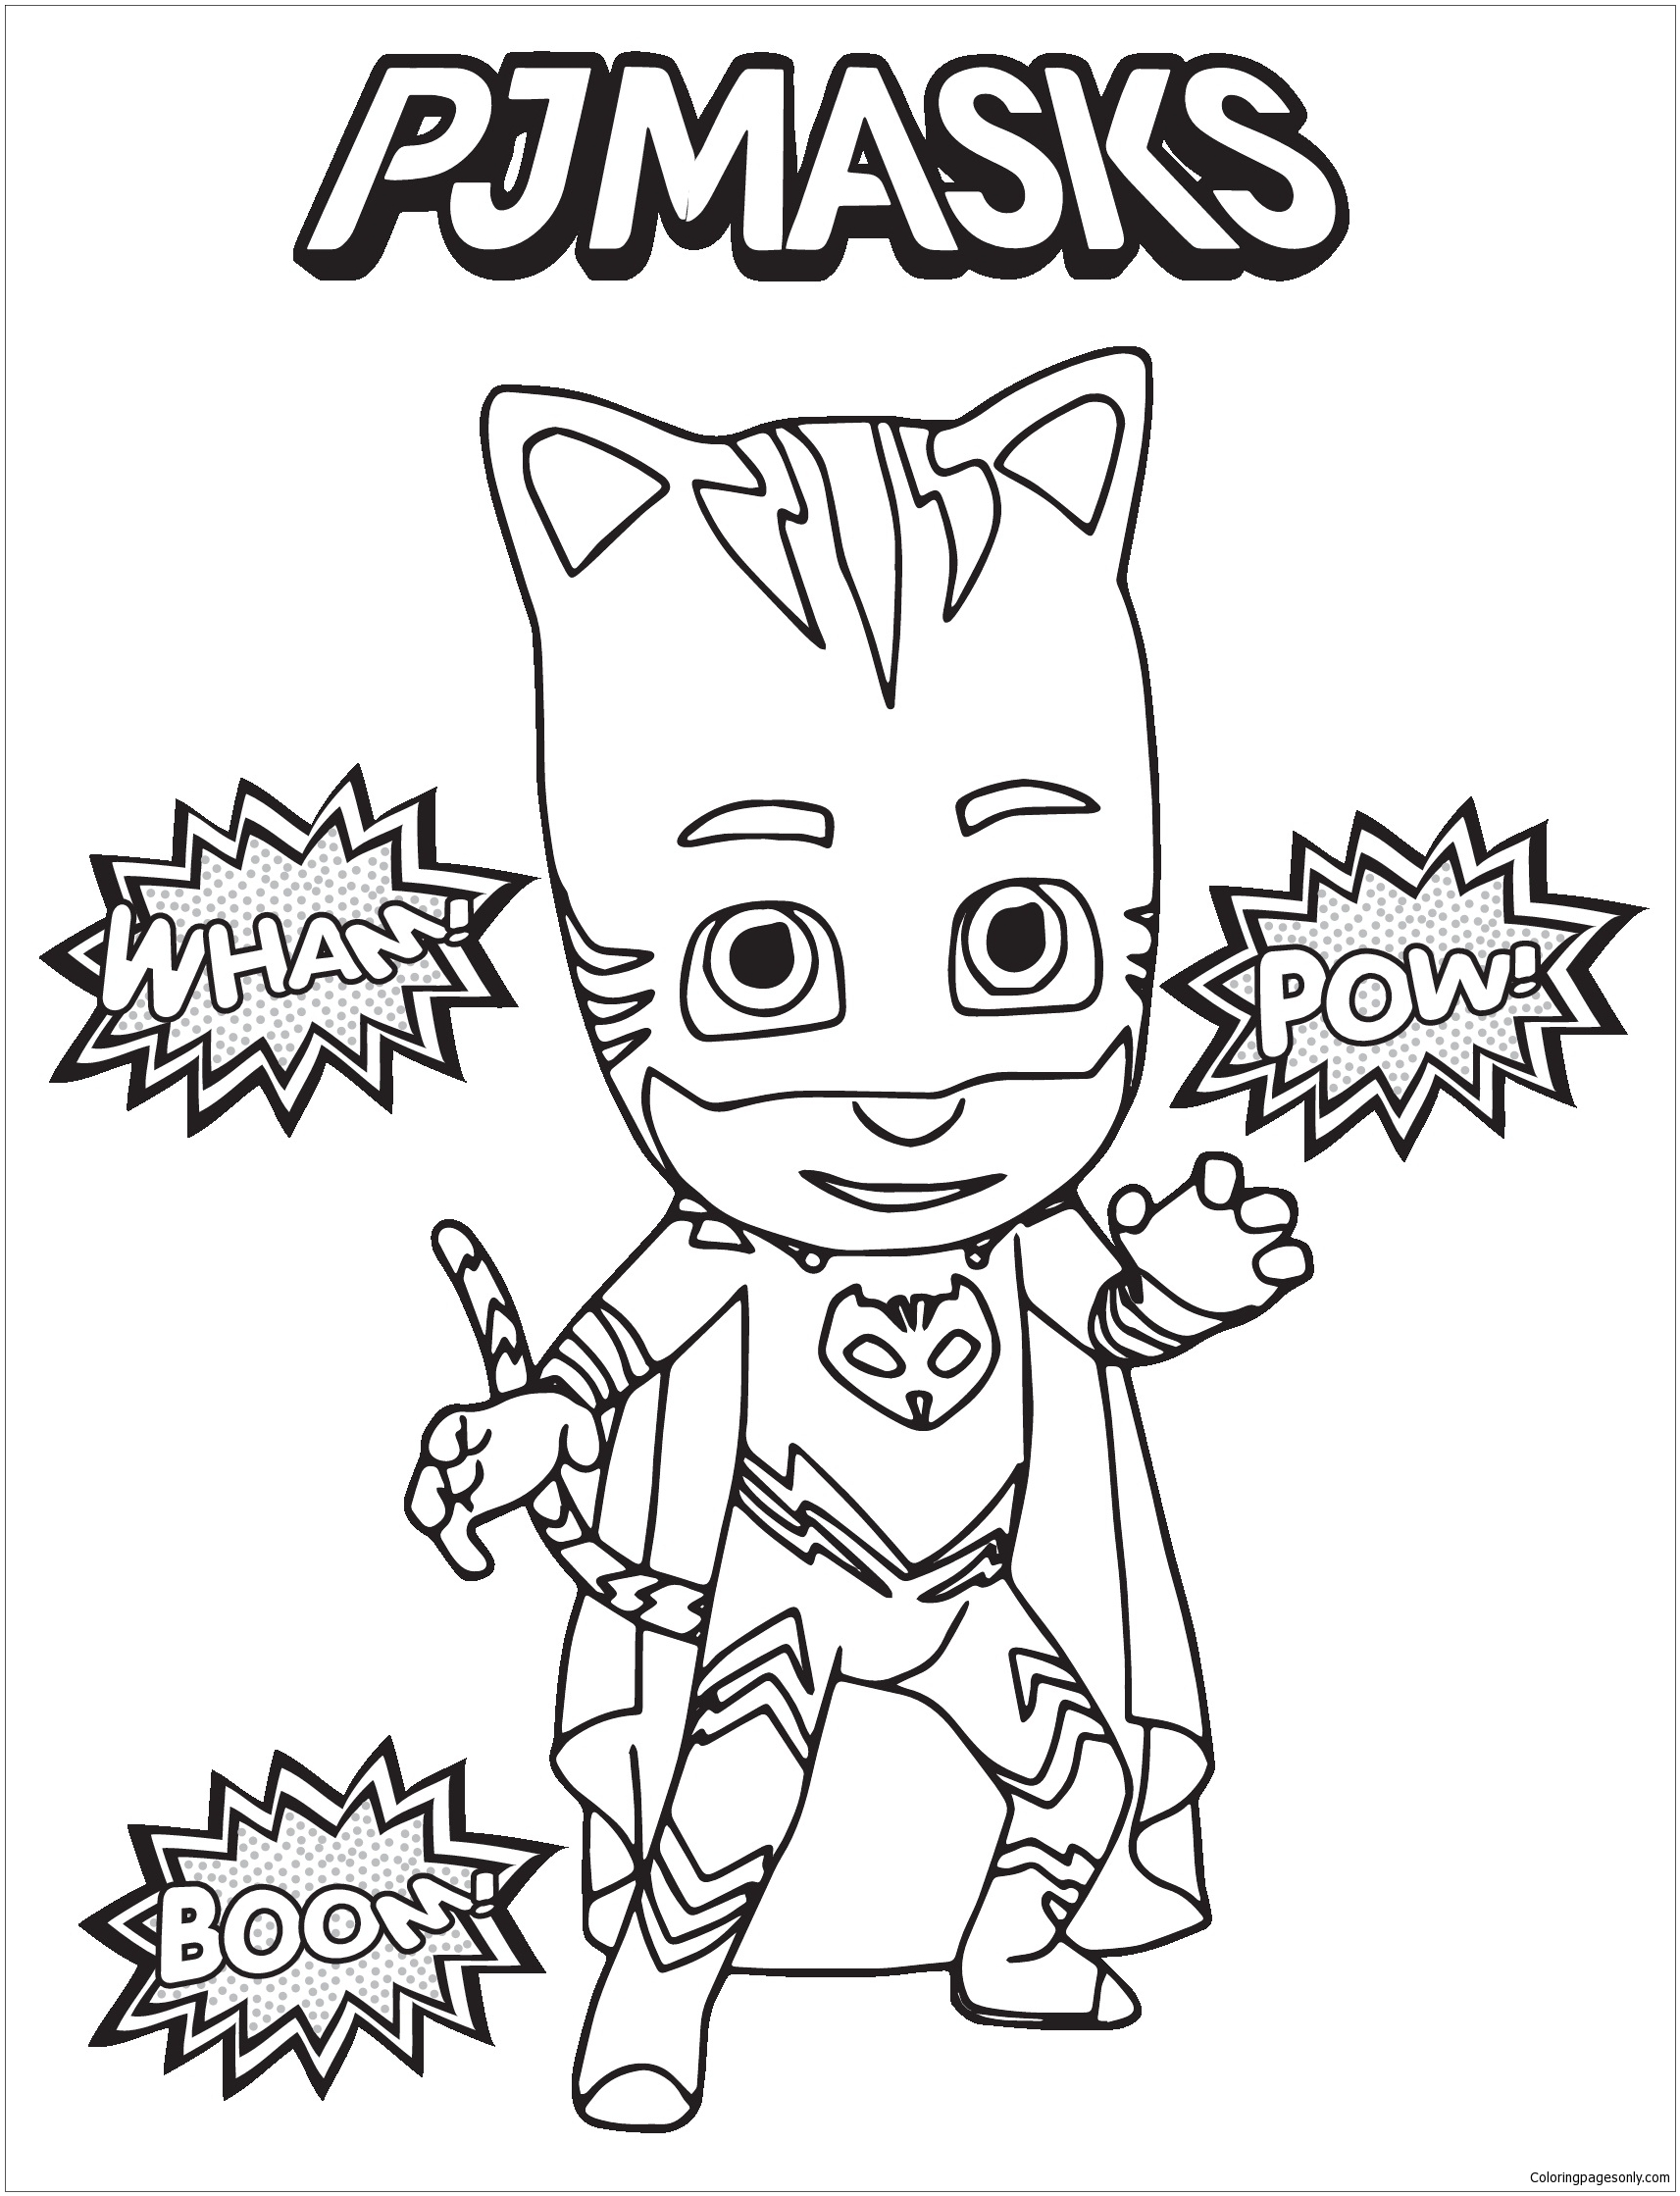 pj-masks-2-coloring-page-free-coloring-pages-online